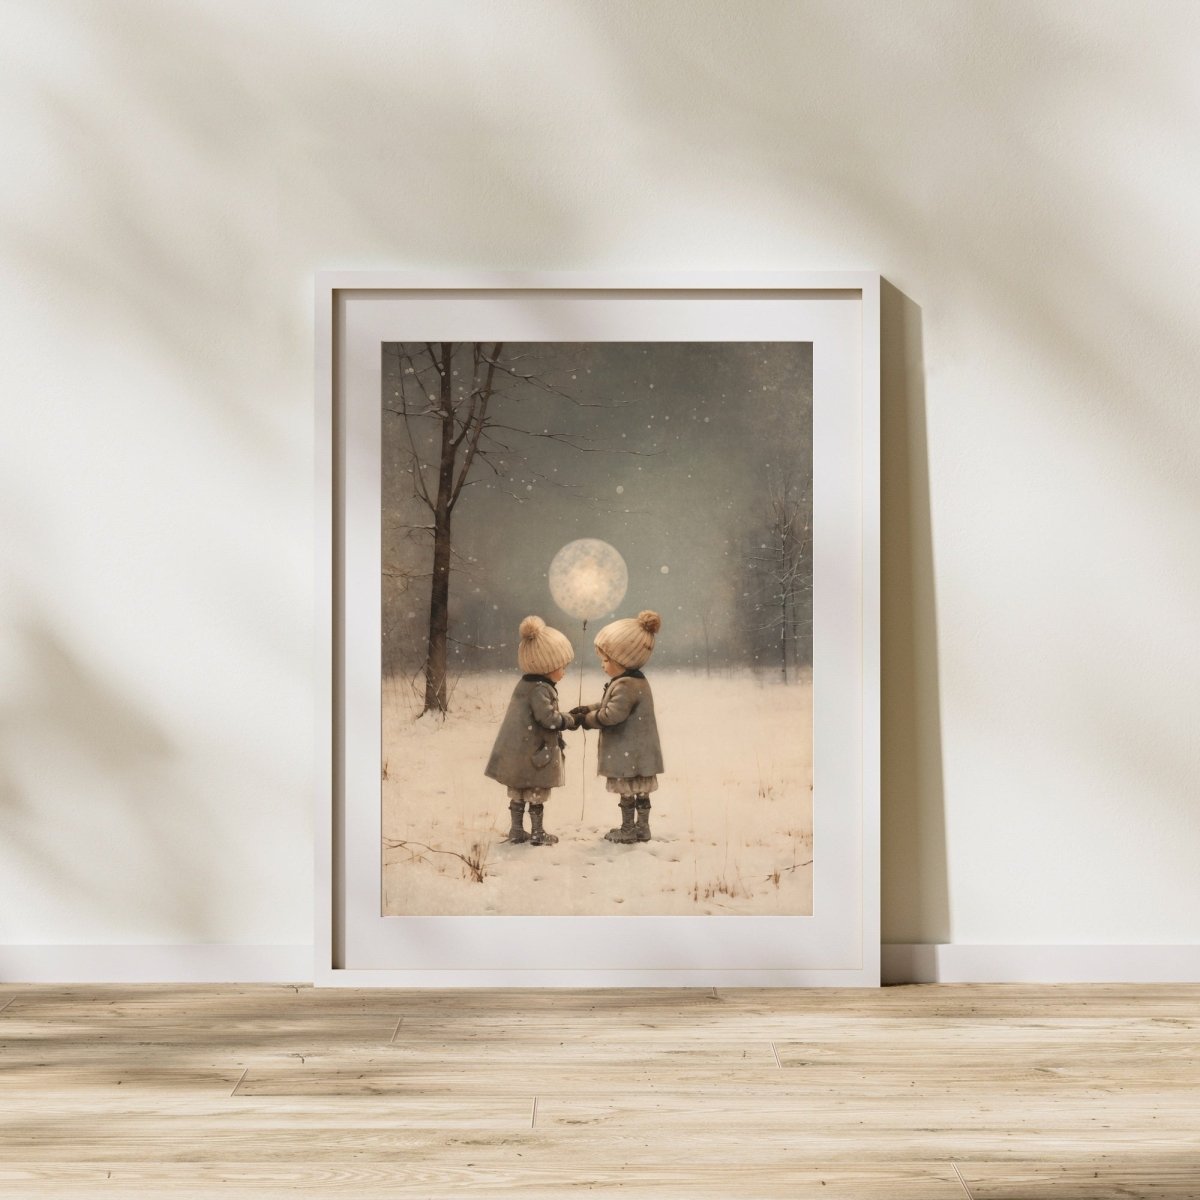 Let's raise the Moon Wall Art Vintage Winter Landscape Charming Children Christmas Scene Muted Seasonal Print Antique Painting Paper Poster Print - Everything Pixel